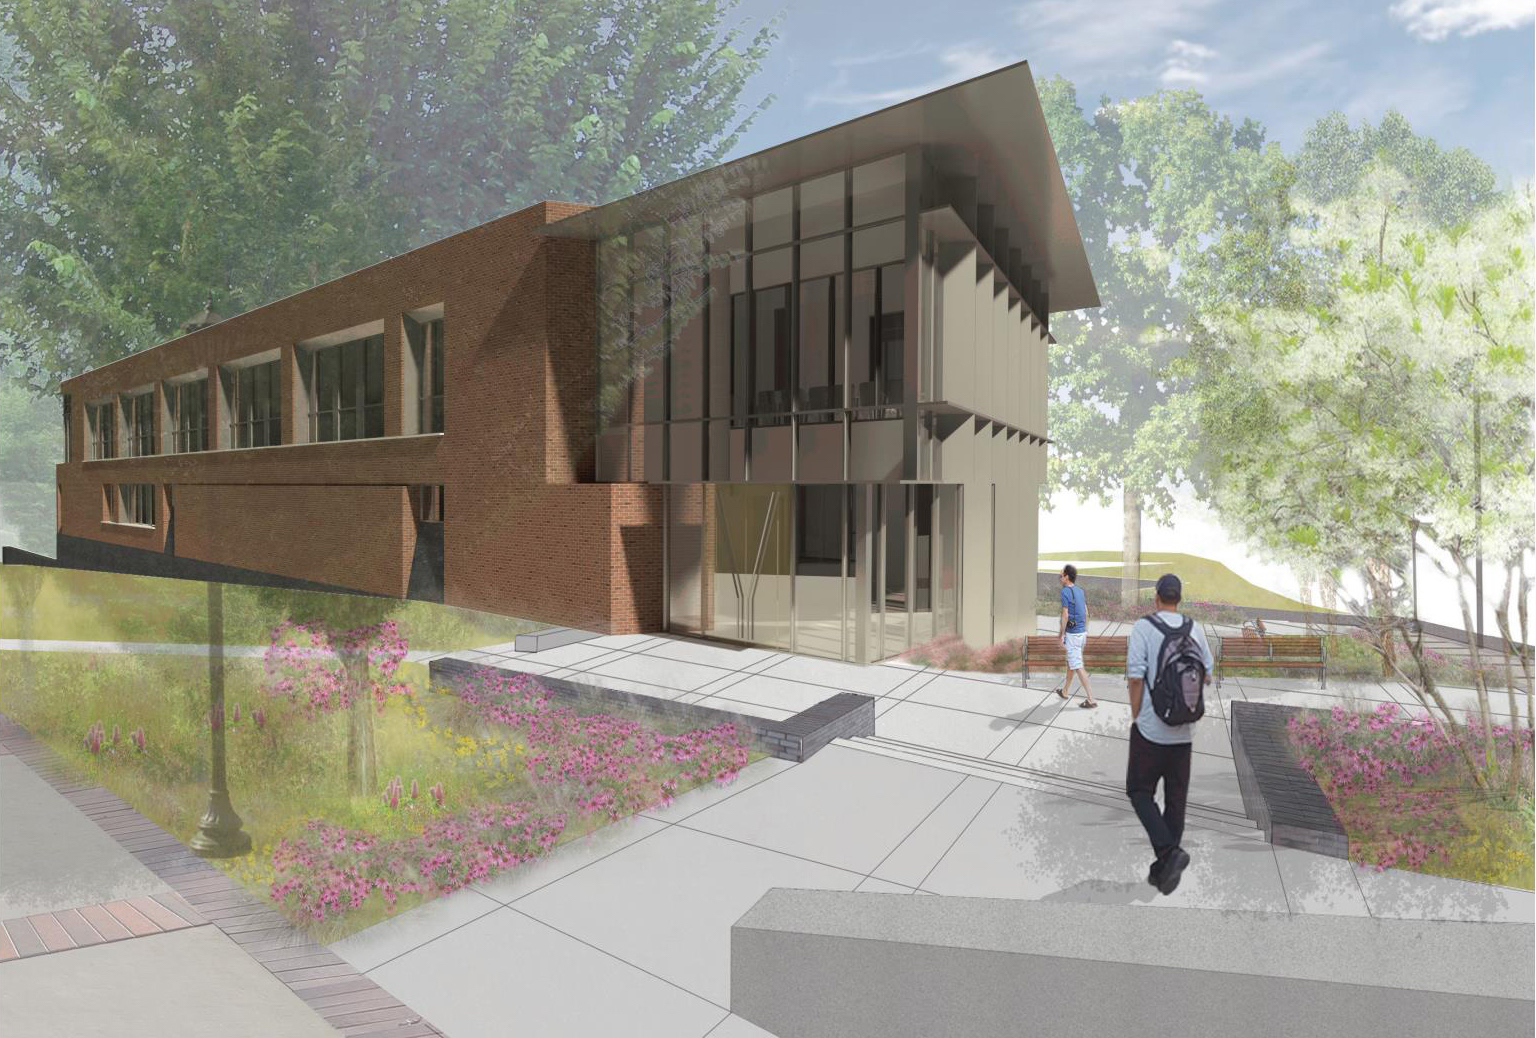 Proposed rendering of the Georgia Tech Campus Safety Building. Image courtesy of Pond | HWA.